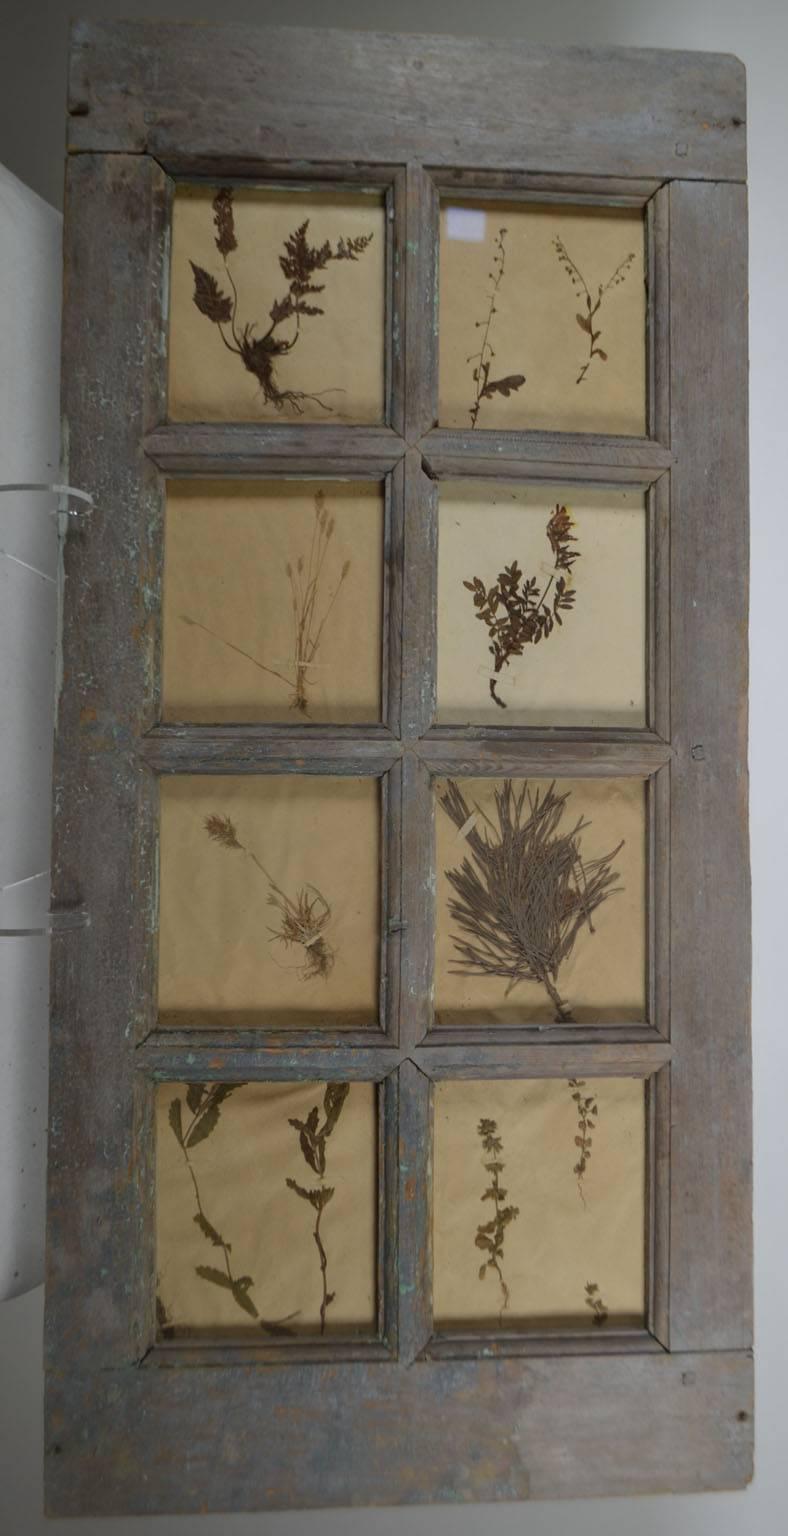 Late 19th Century Herbiers framed in multi paned French window. 25 in various sizes available.